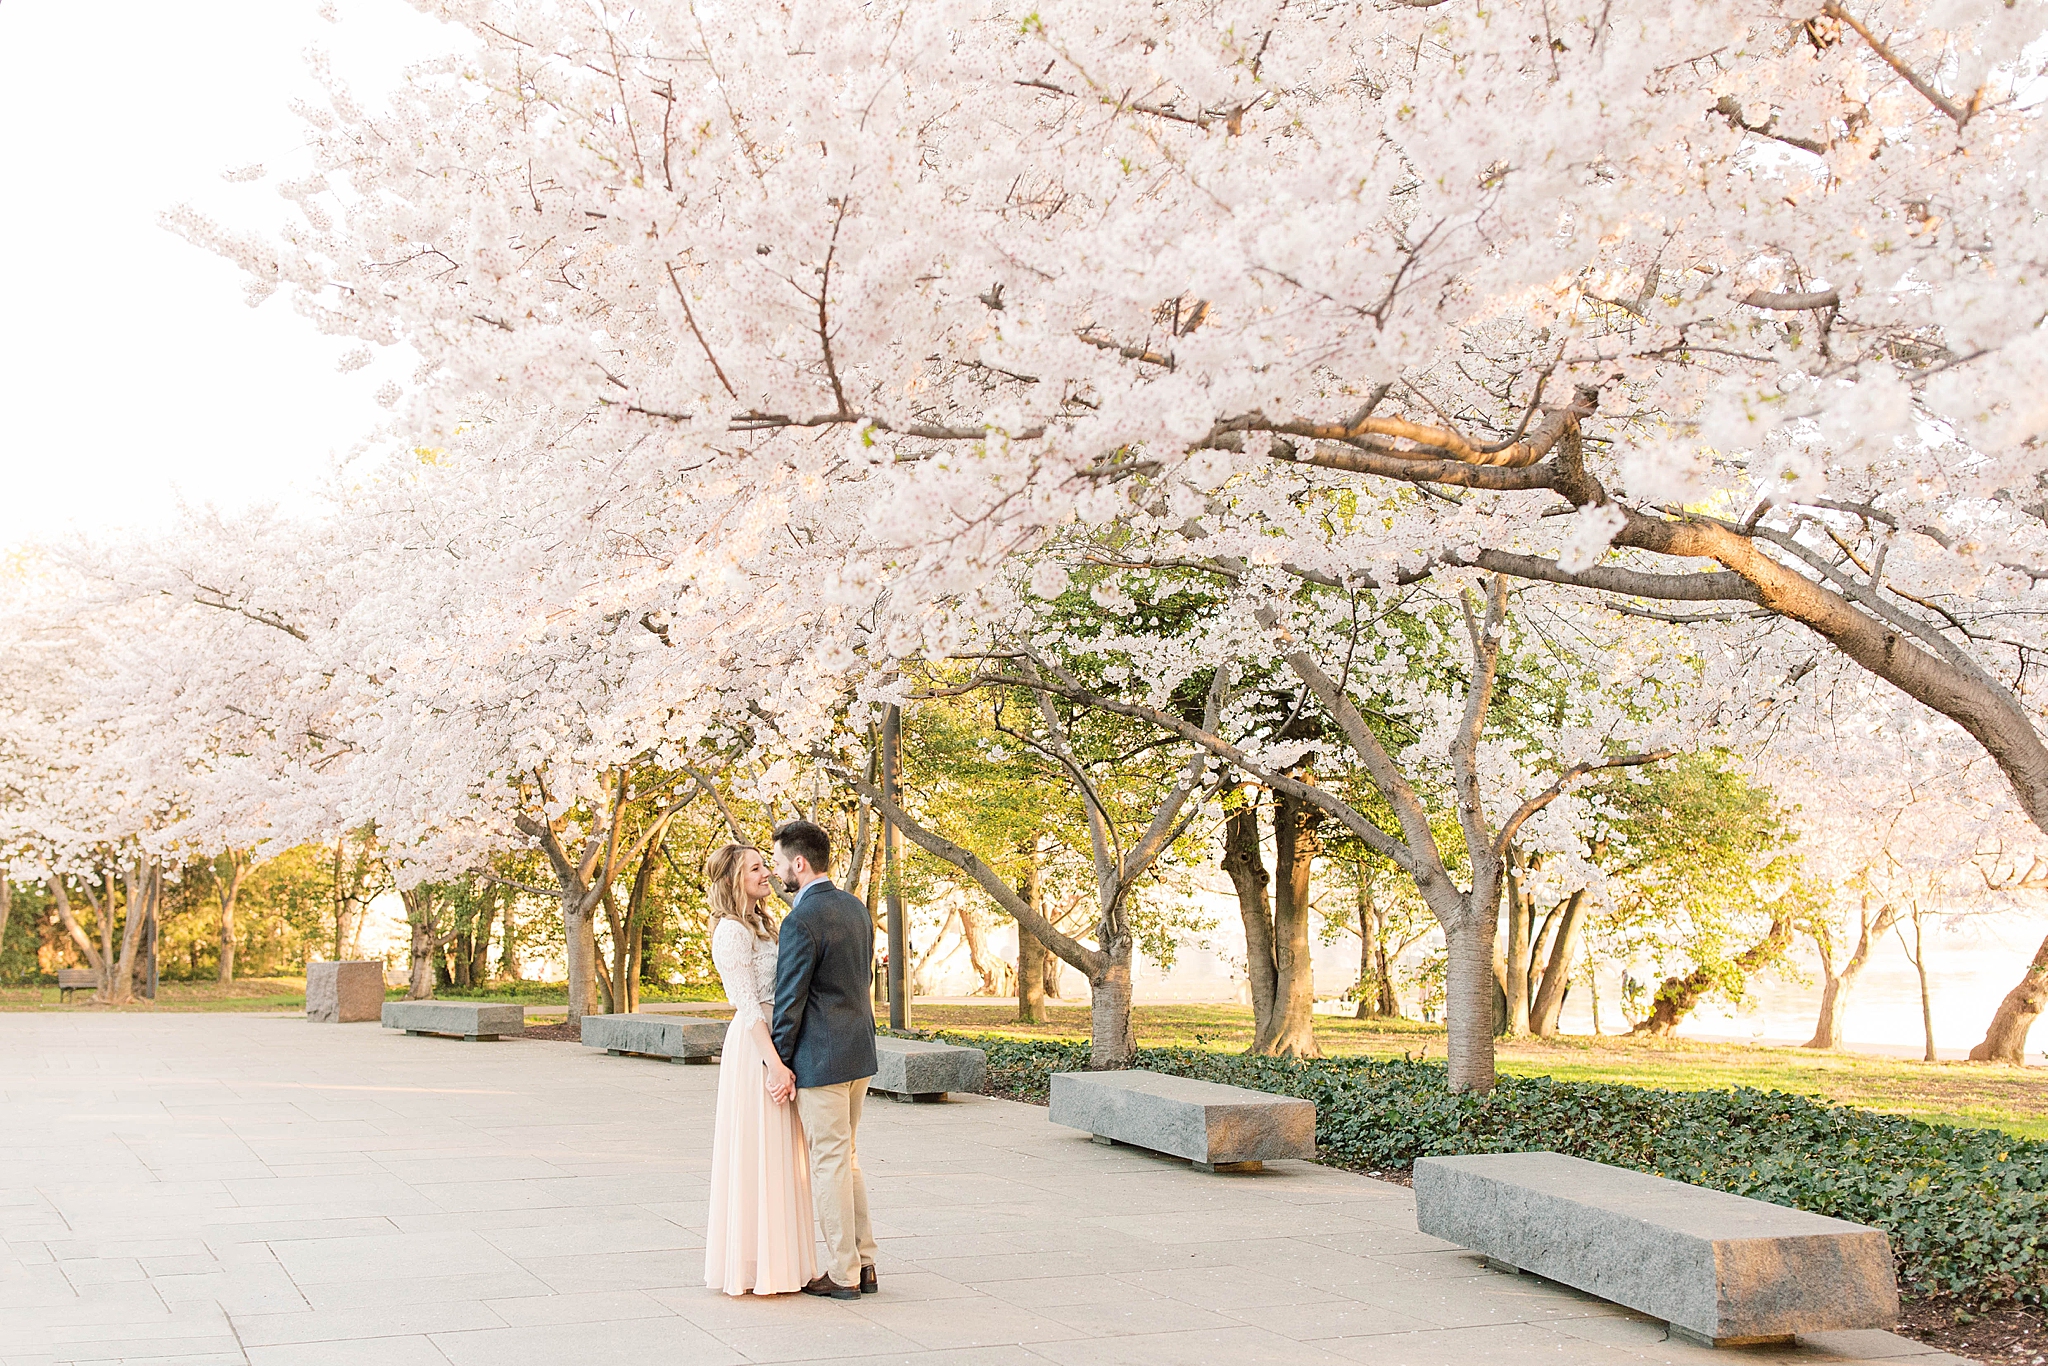 A romantic sunrise on the Tidal Basin in Washington, DC amongst the iconic cherry blossoms.